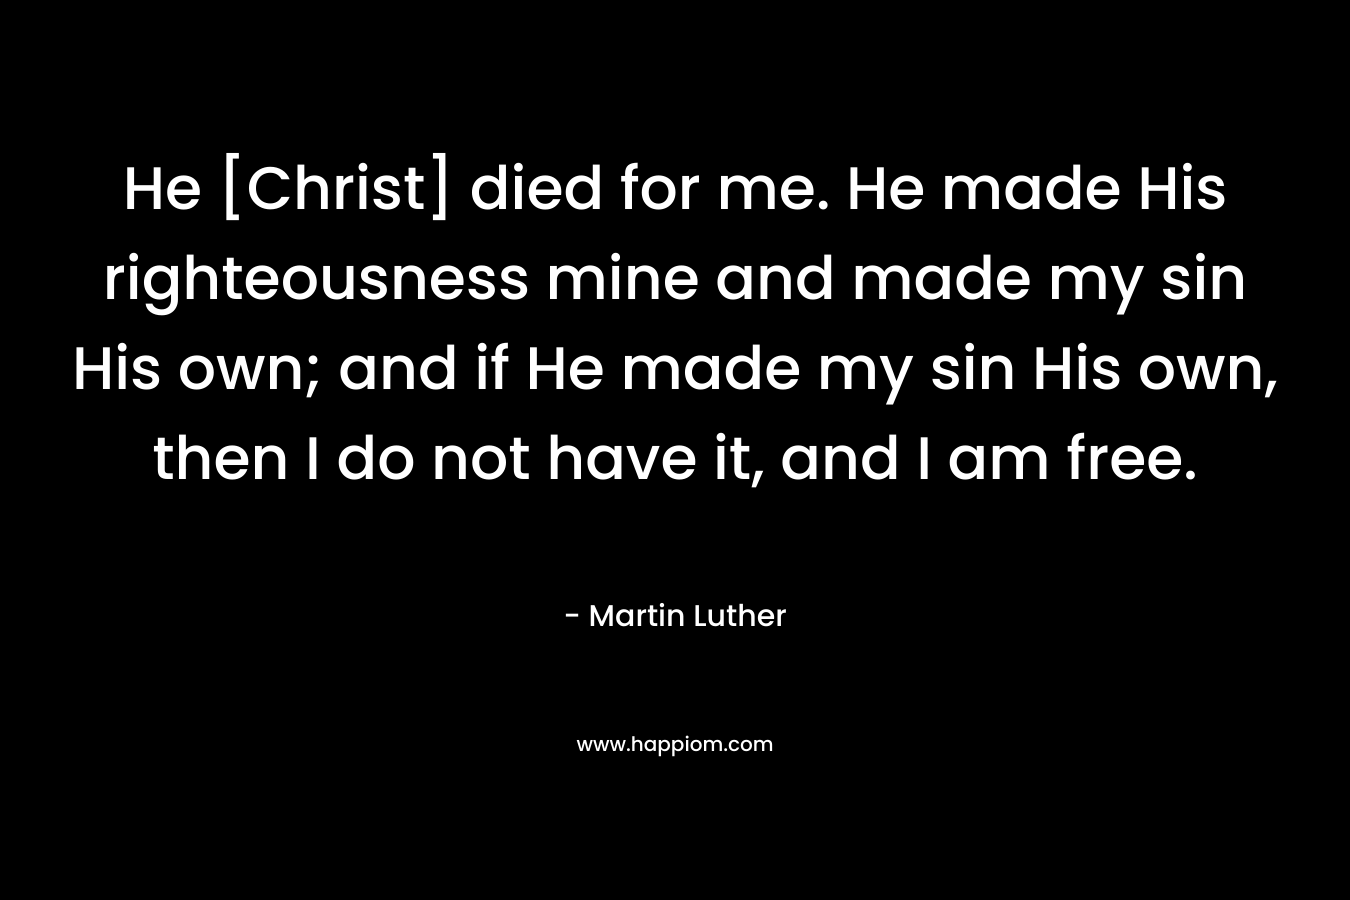 He [Christ] died for me. He made His righteousness mine and made my sin His own; and if He made my sin His own, then I do not have it, and I am free. – Martin Luther